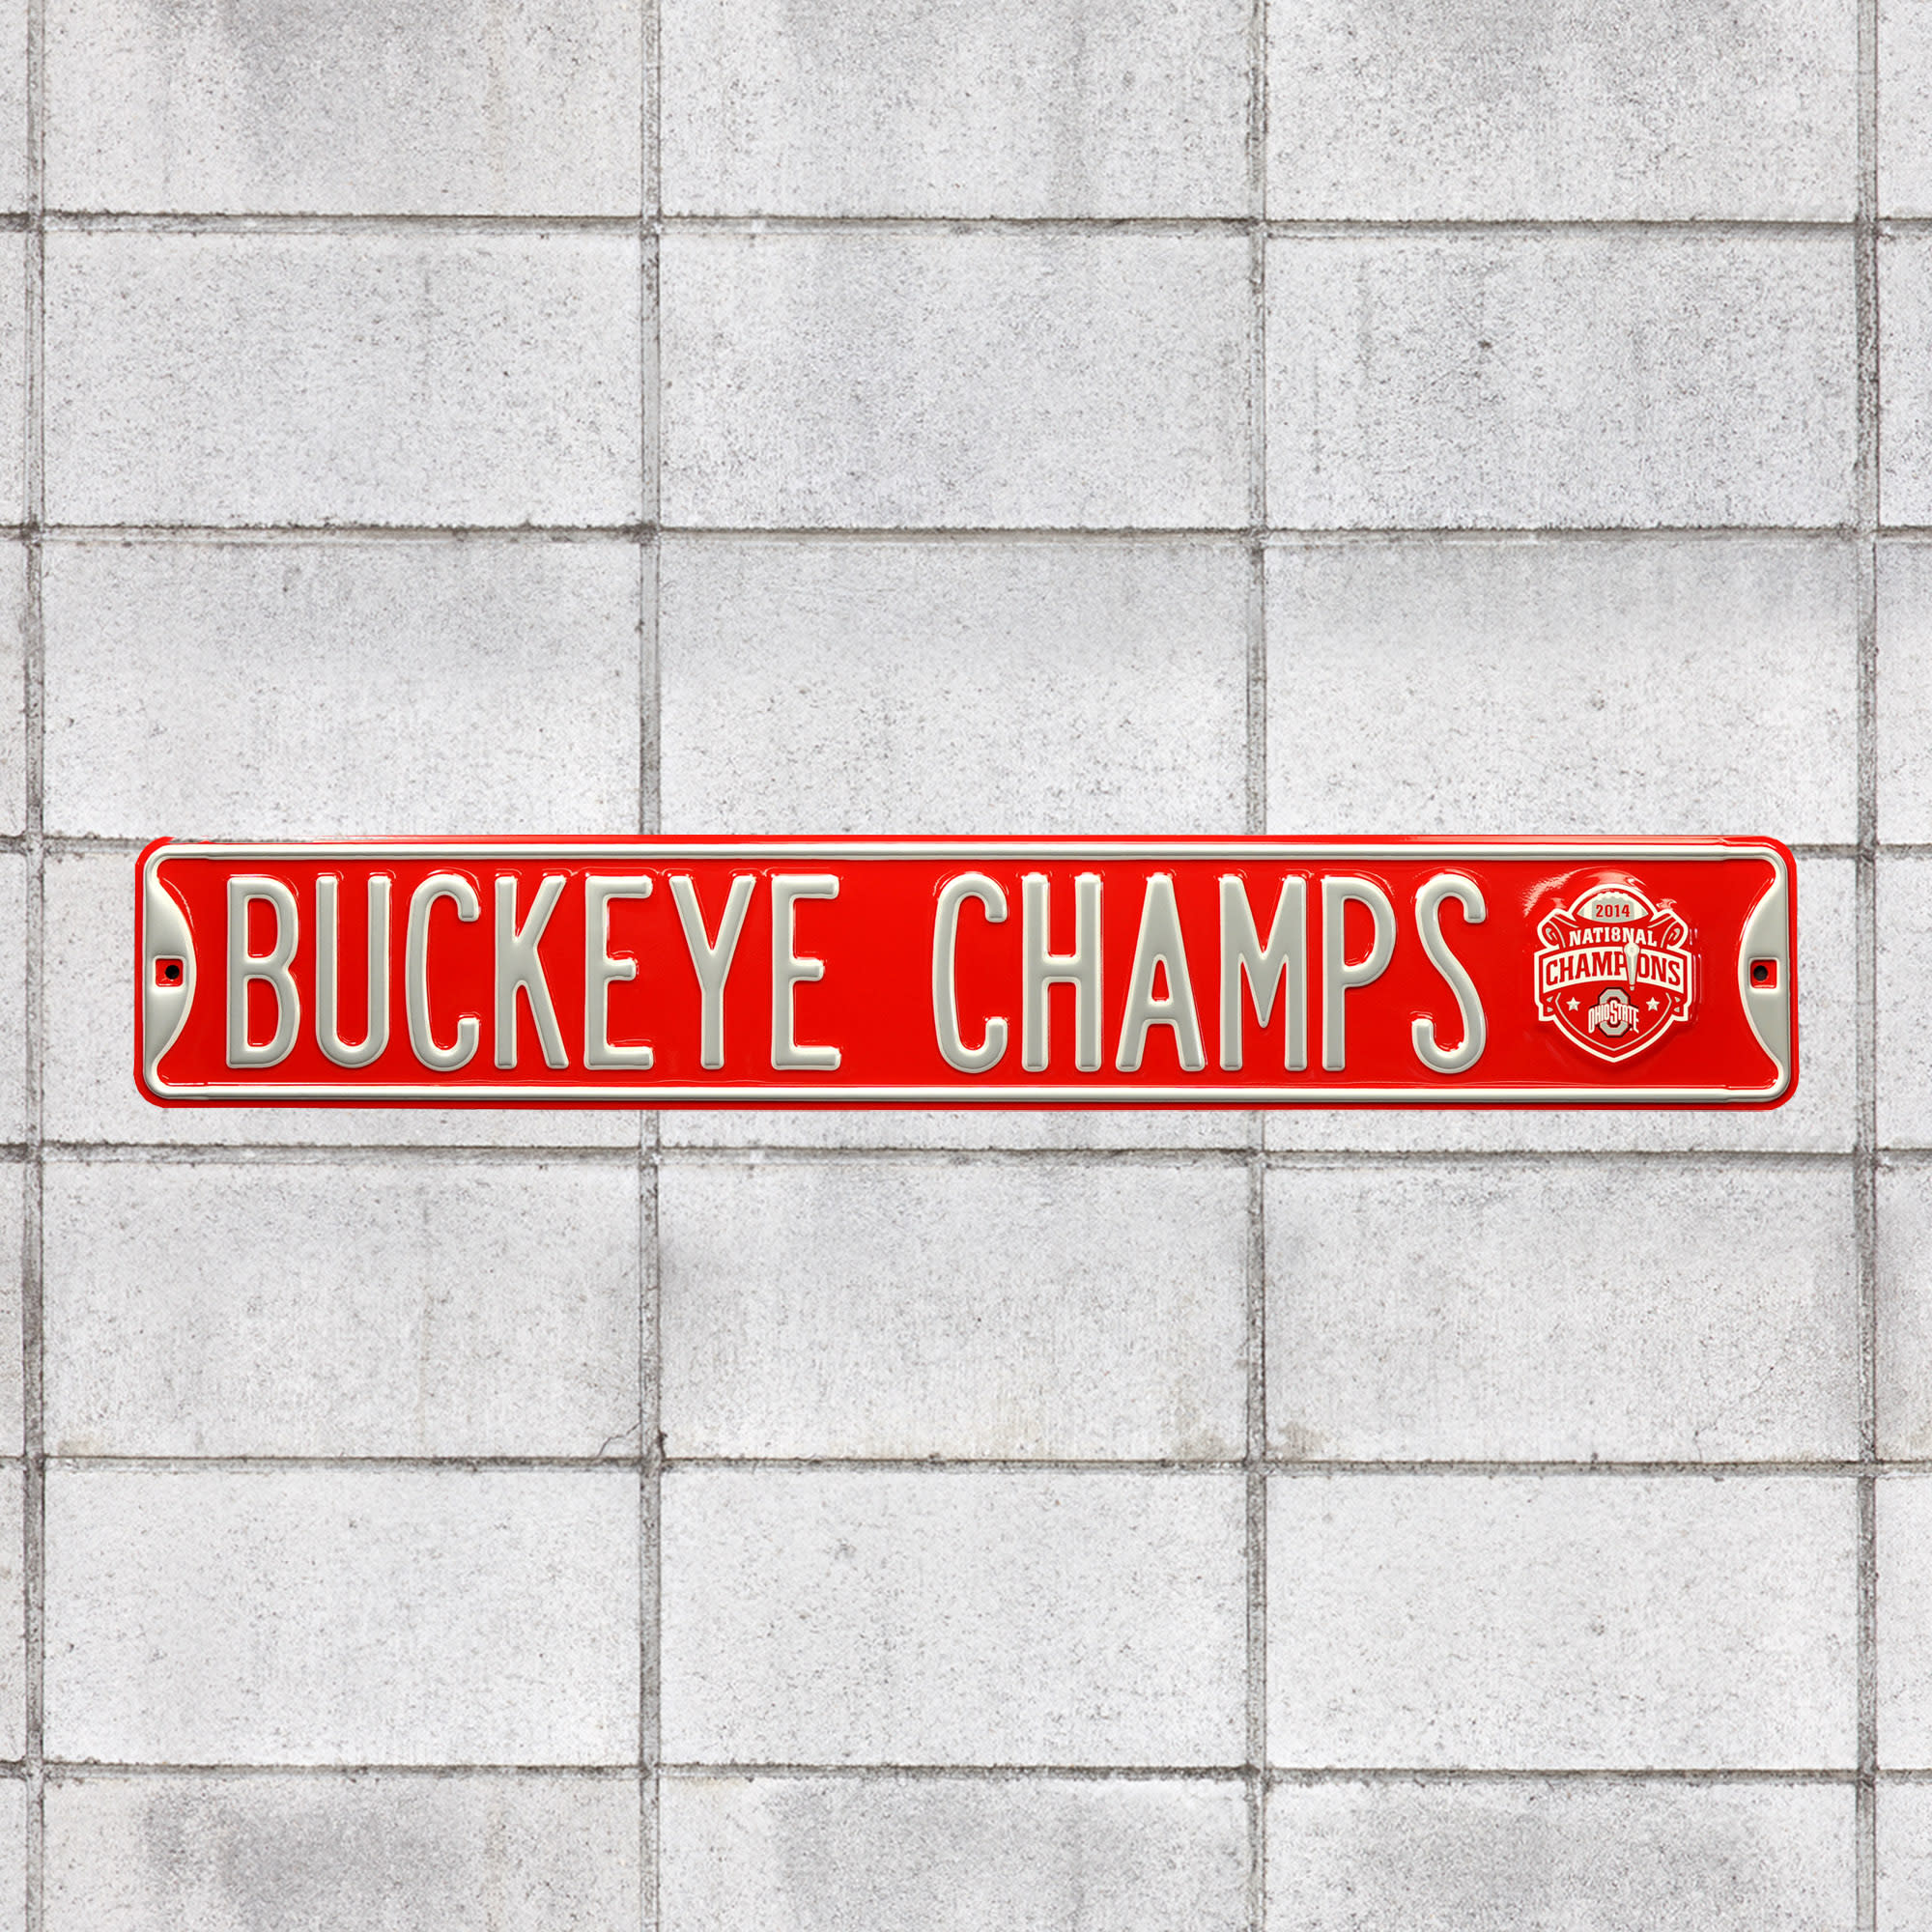 Ohio State Buckeyes: Crushed Parking - Officially Licensed Metal Street Sign 36.0"W x 6.0"H by Fathead | 100% Steel